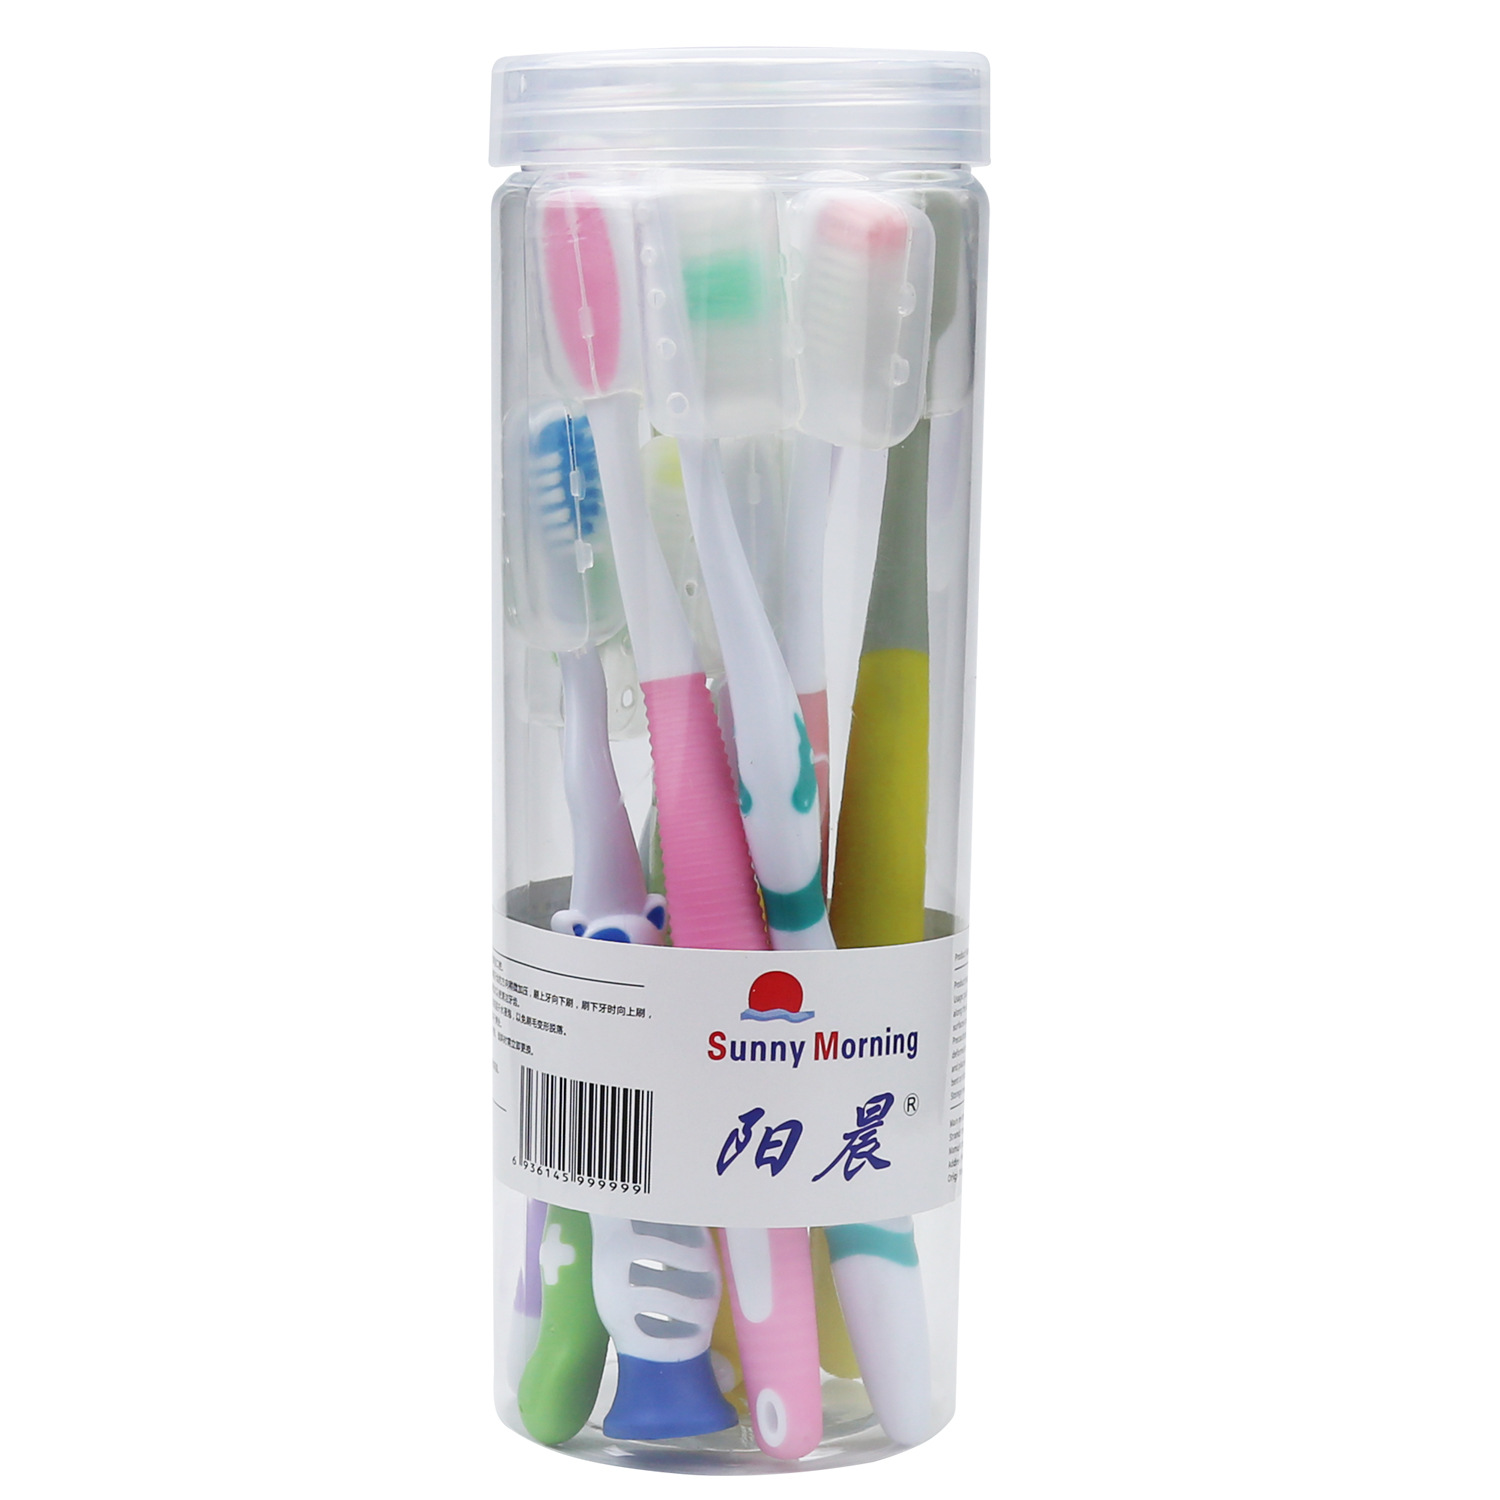 10 Drum Toothbrush 6 adult Household 4 children Valuables lovers toothbrush